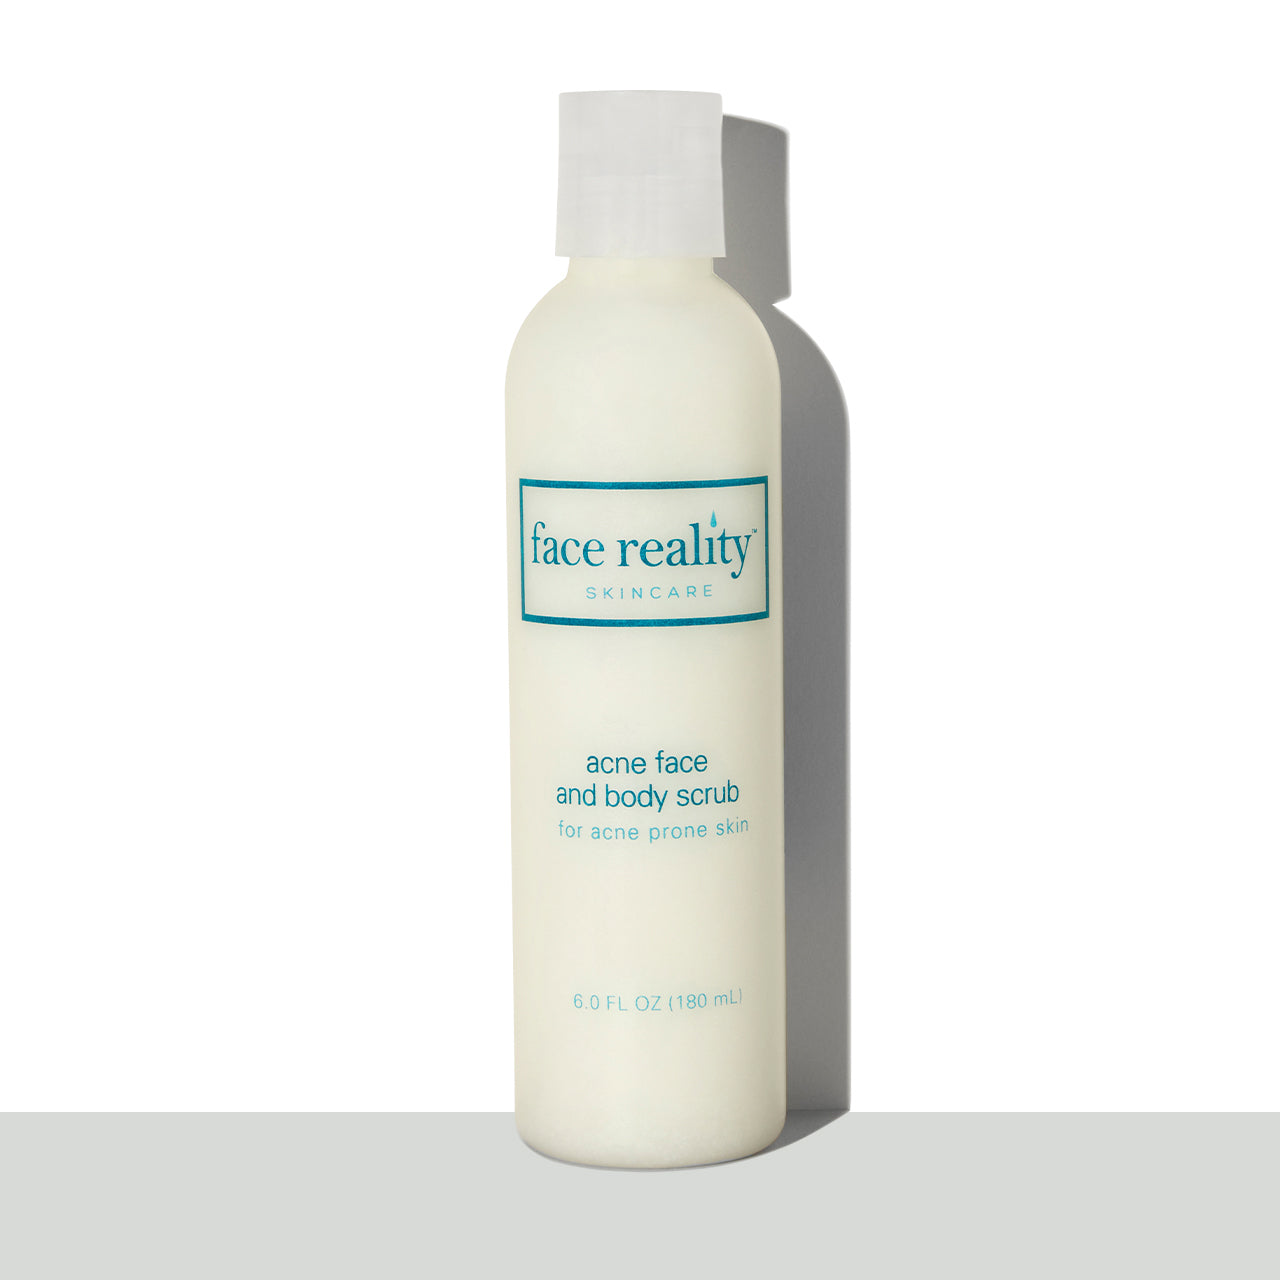 Clear six ounce bottle of Face Reality acne face and body scrub in front of a white background on a grey surface